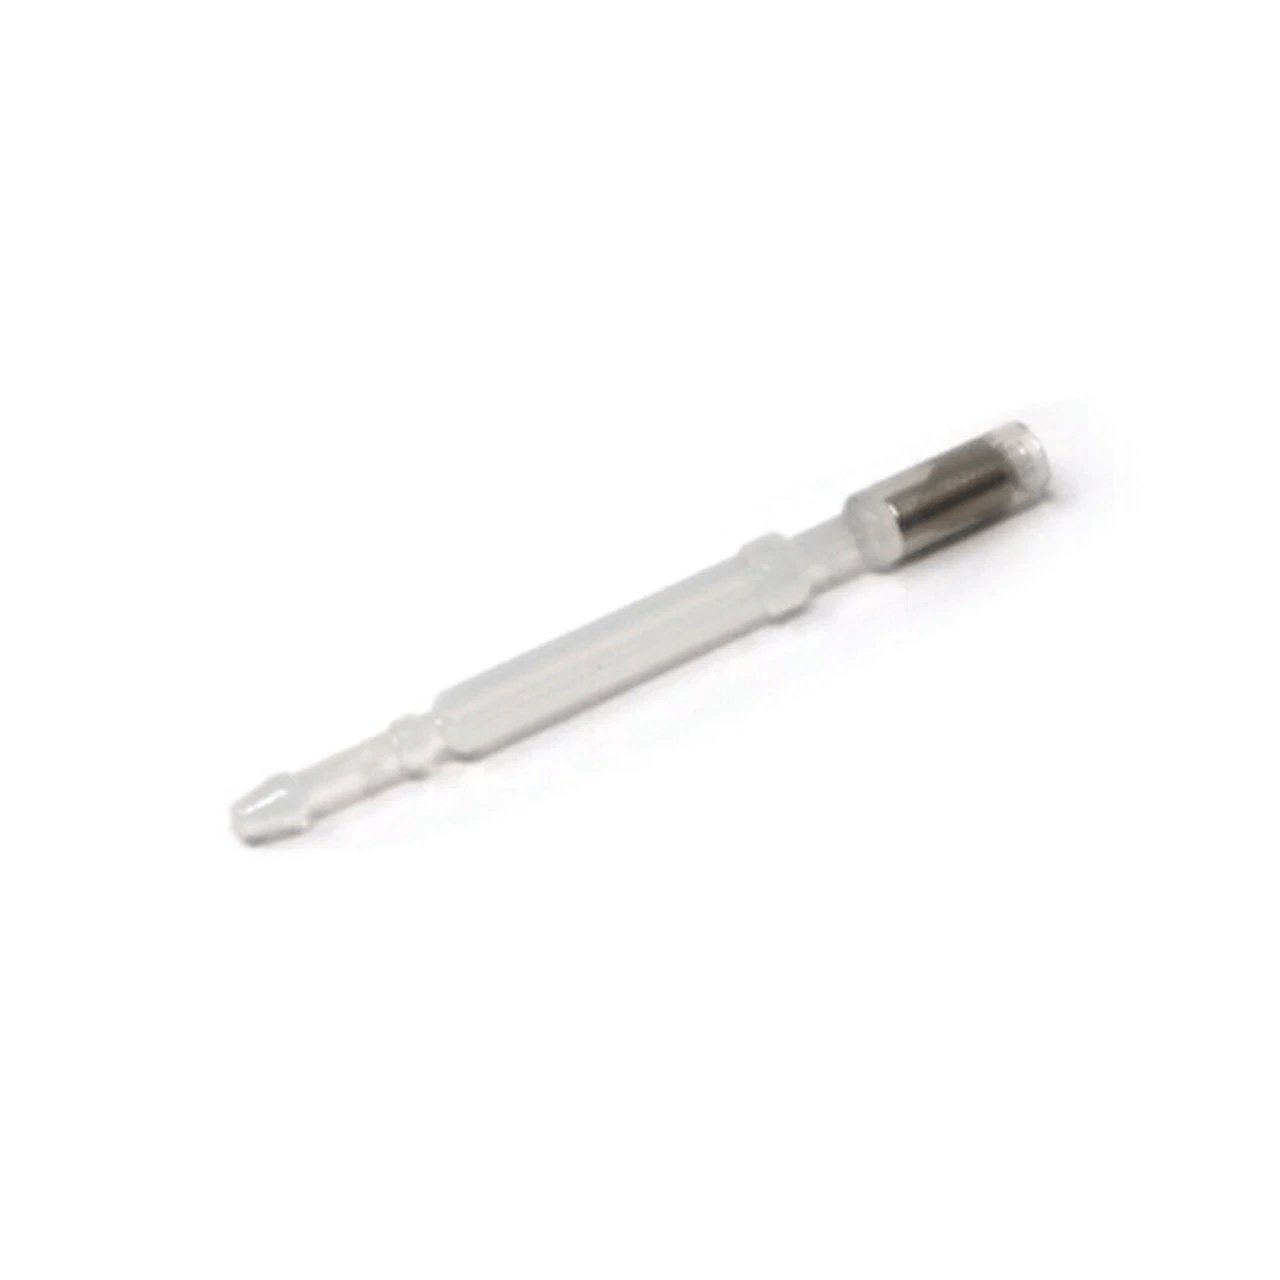 Replacement Needle / Nib / Tip for BL-Touch / BLTouch Auto Bed Leveling Sensor